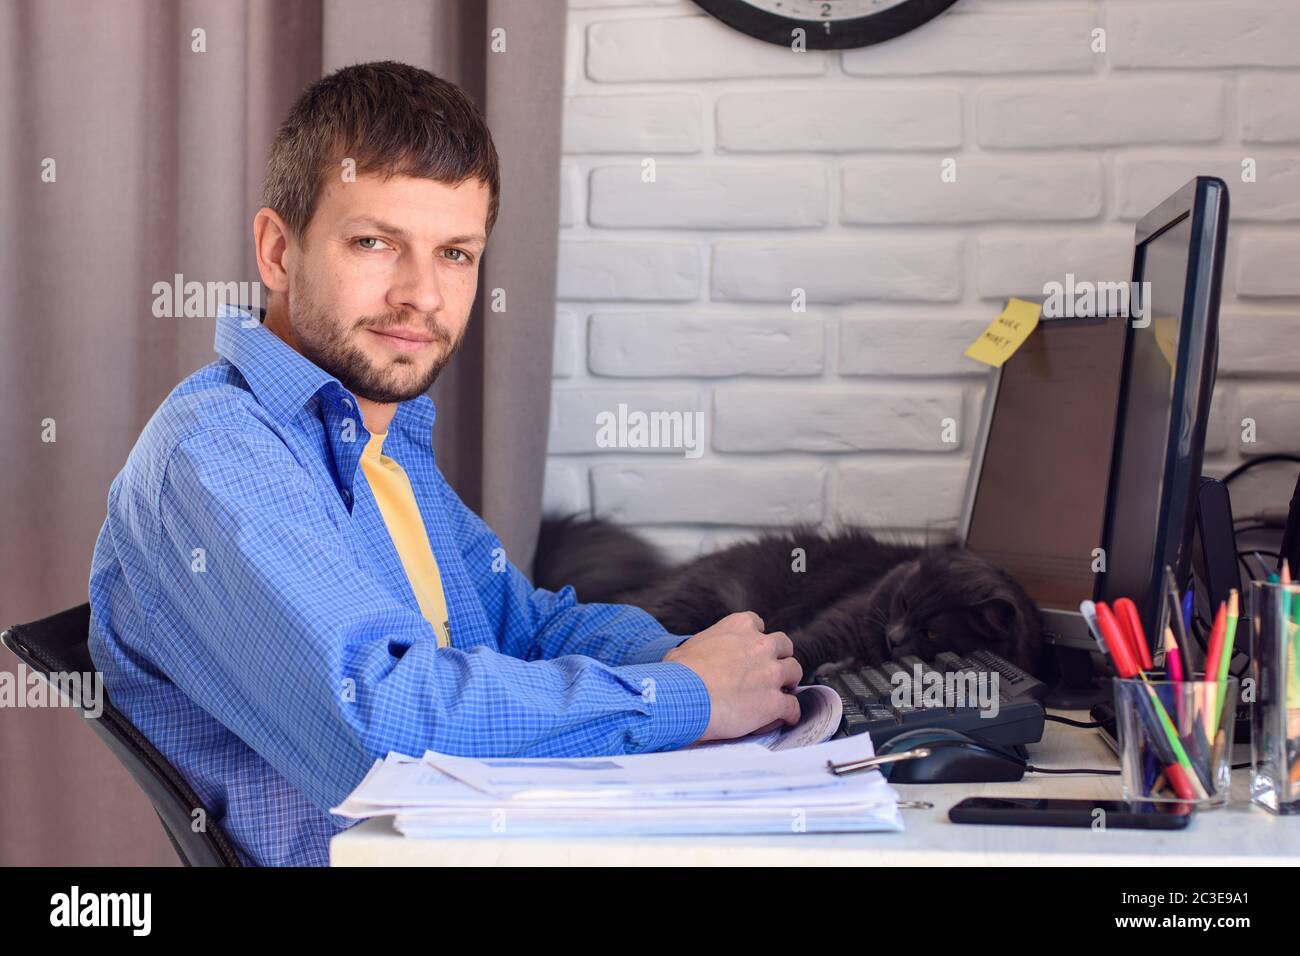 Portrait of a self-employed man working remotely Stock Photo